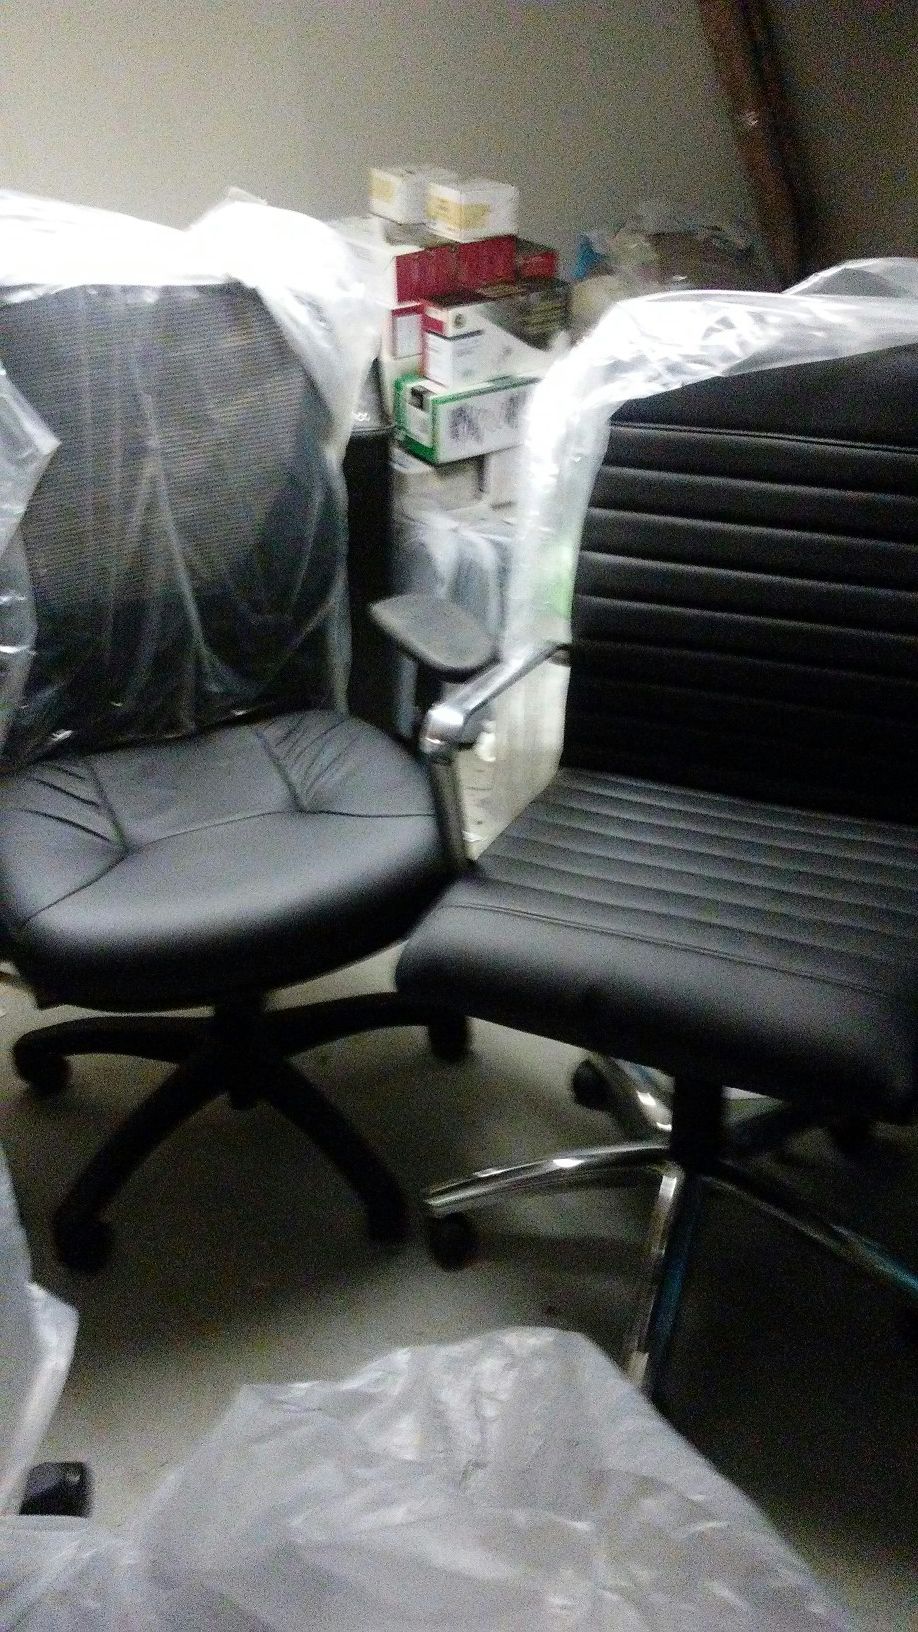 New office chairs.